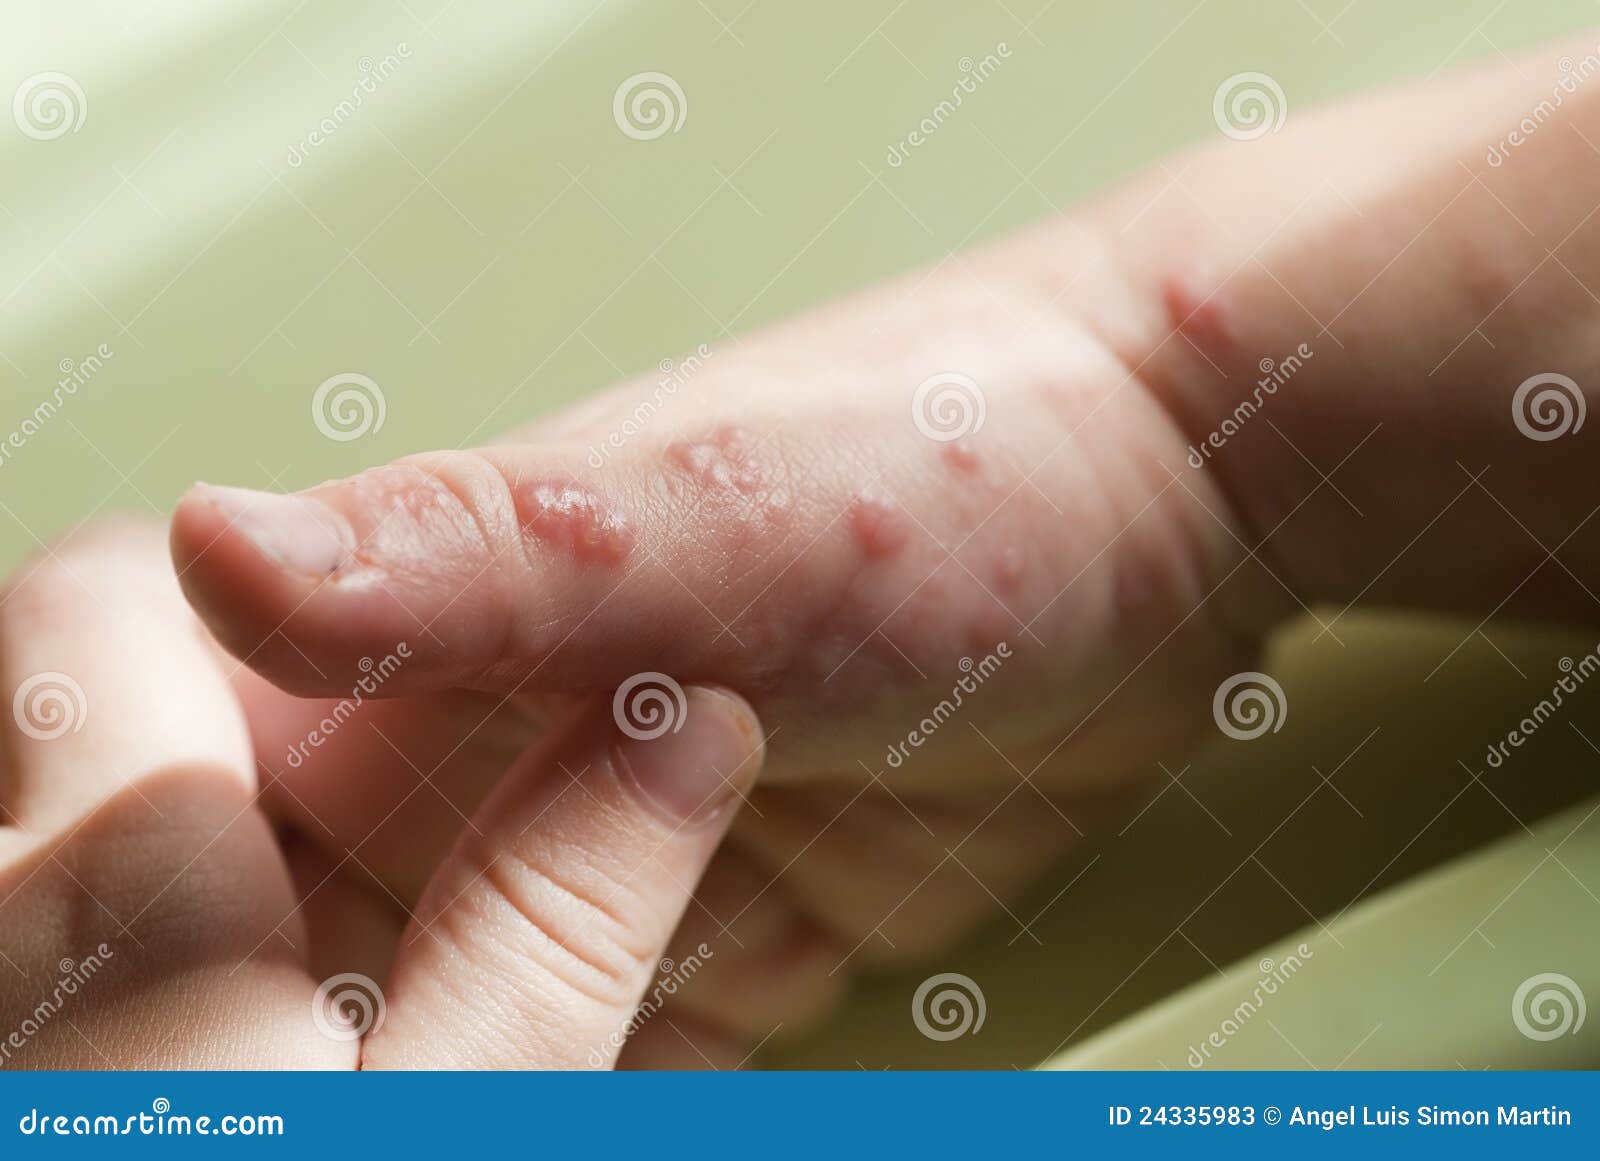 herpes zoster in a child hand.